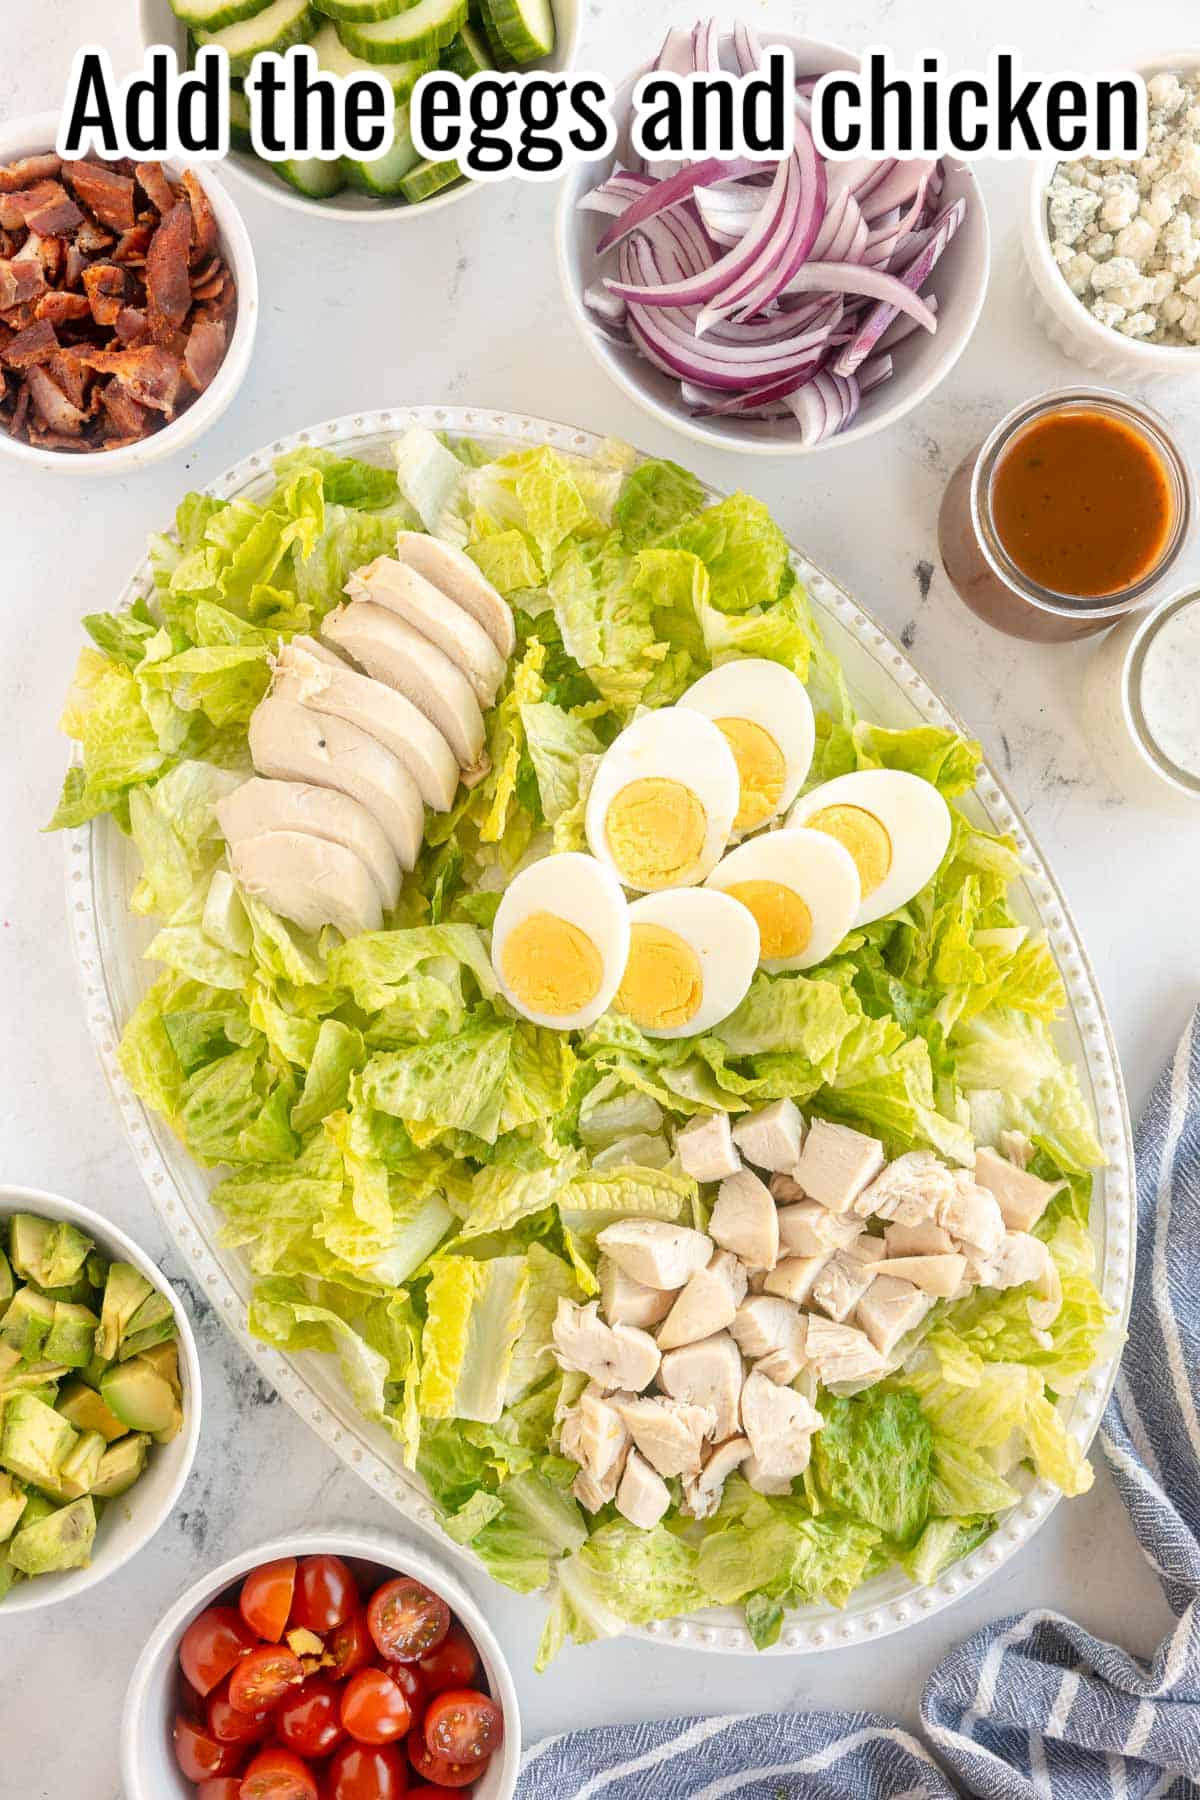 Platter with lettuce, chicken and eggs.